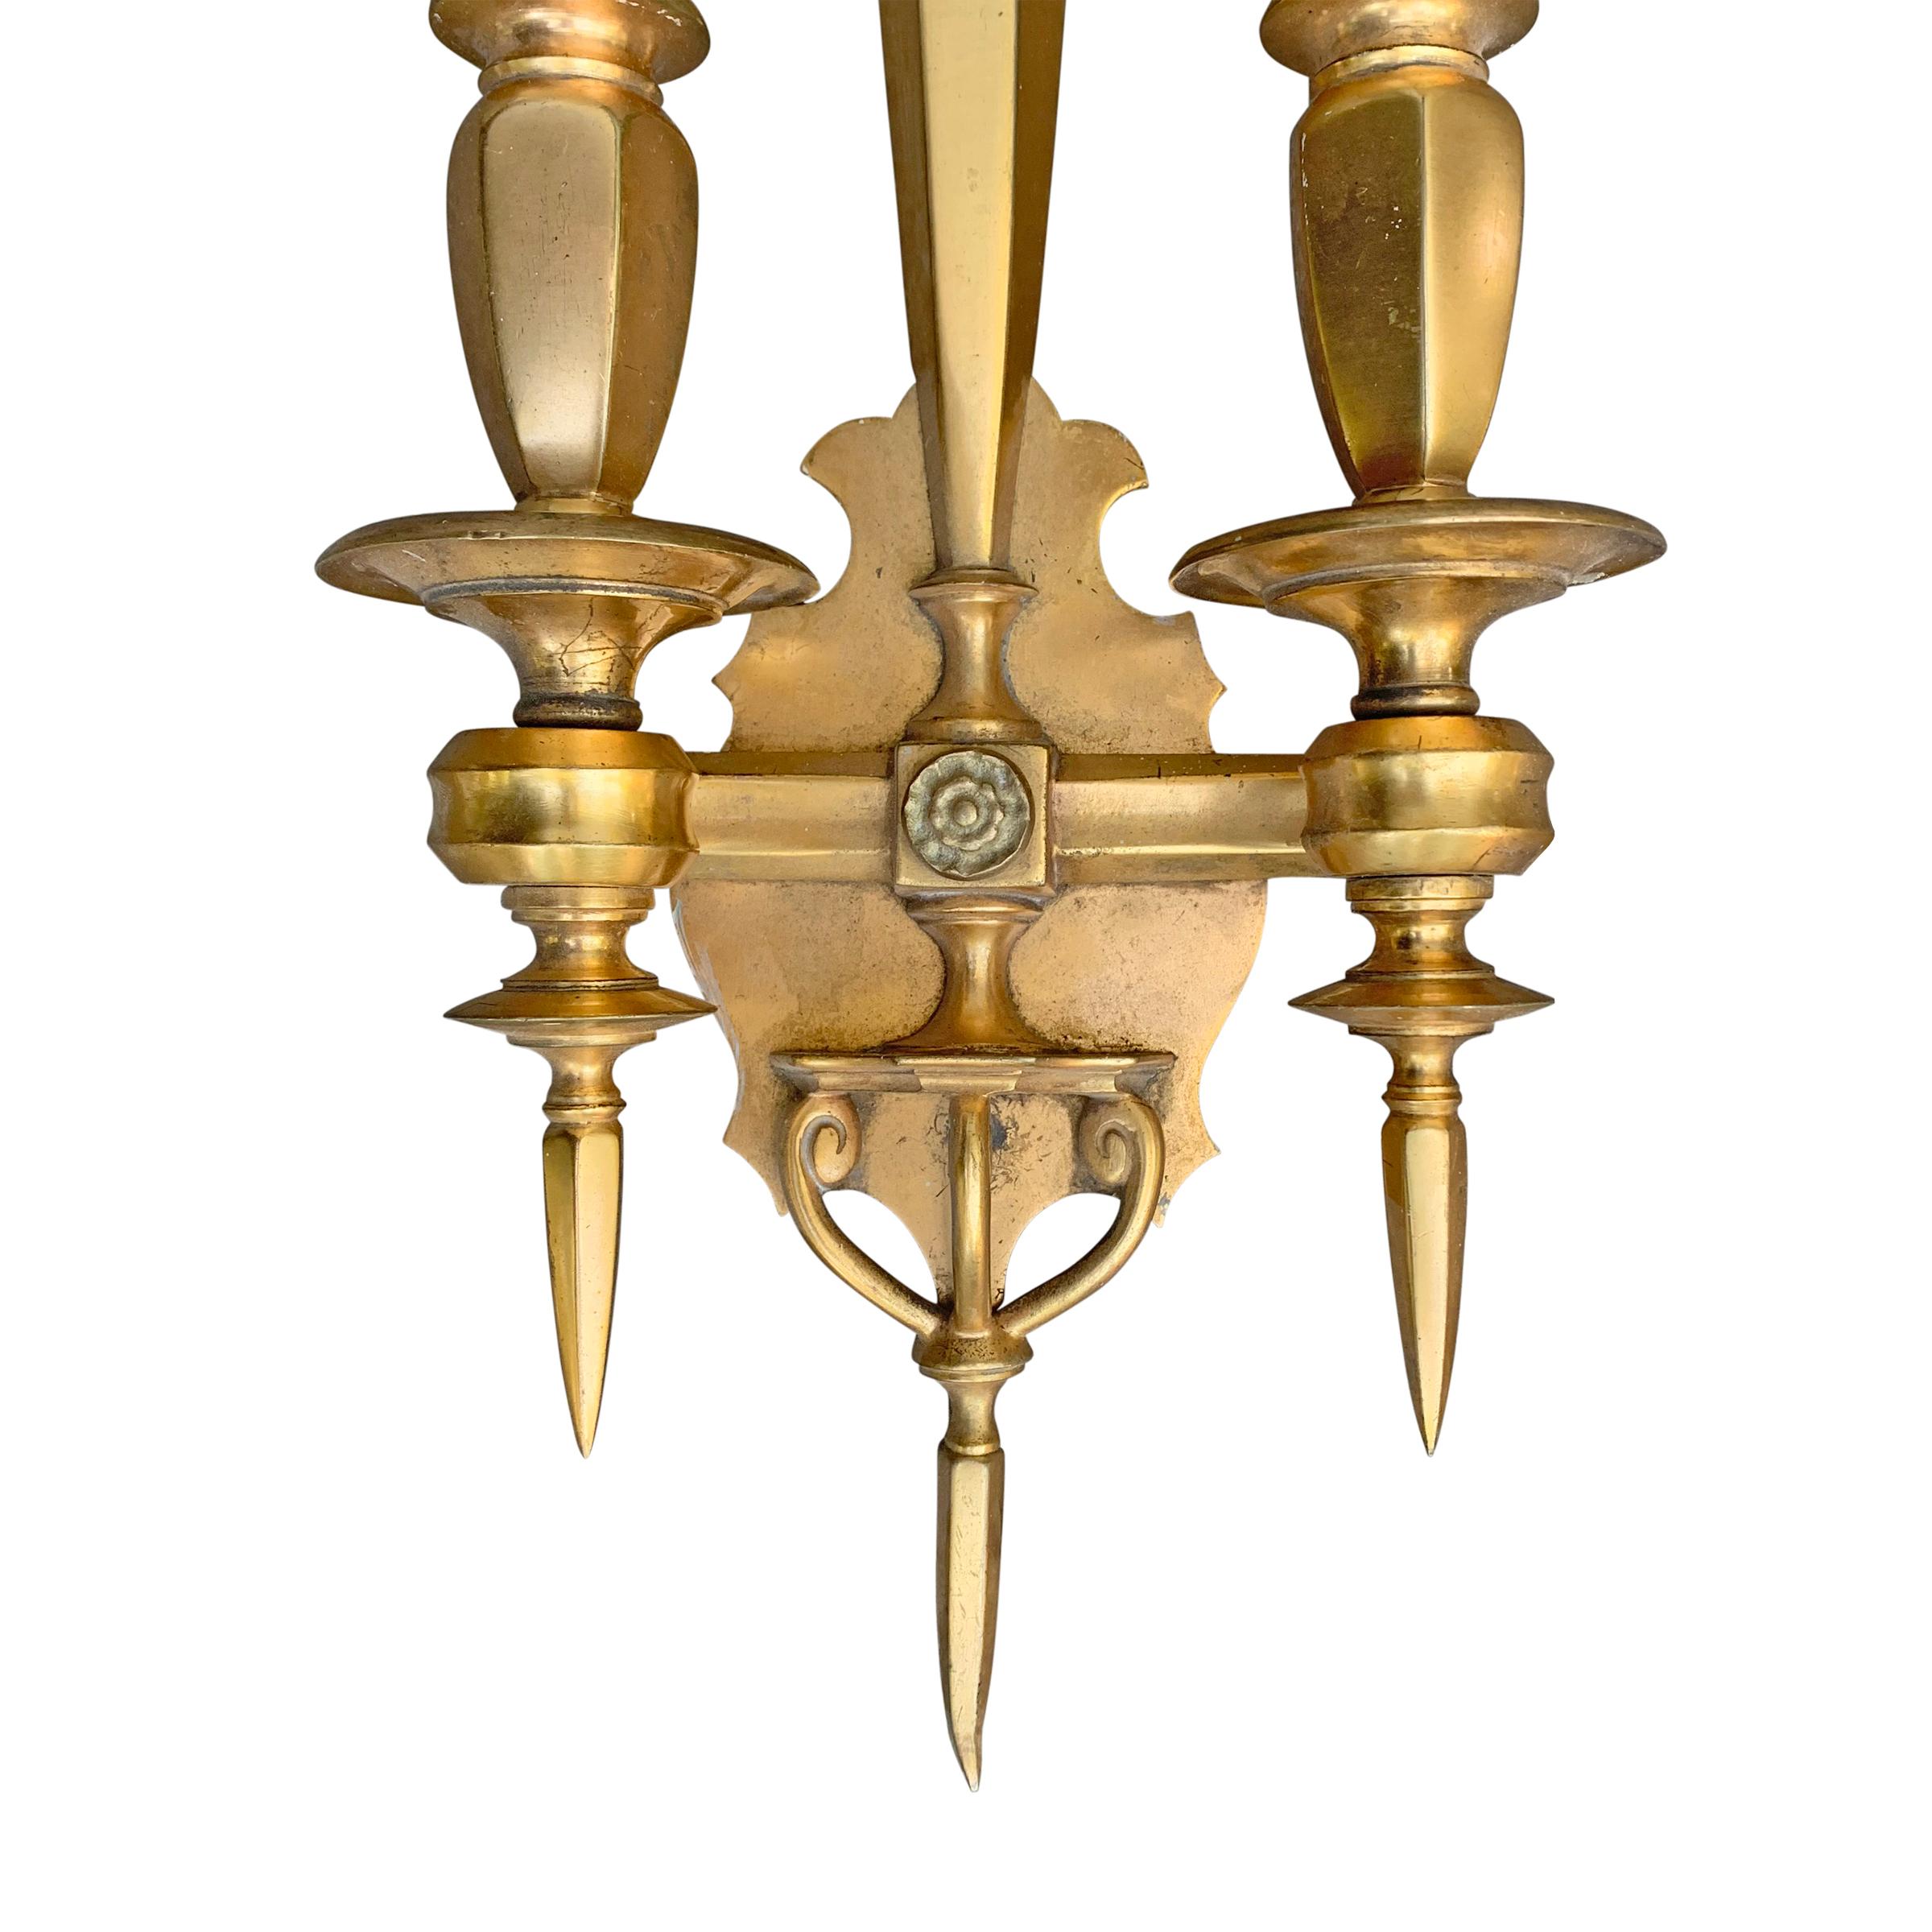 Neoclassical Pair of Early 20th Century Swedish Sconces